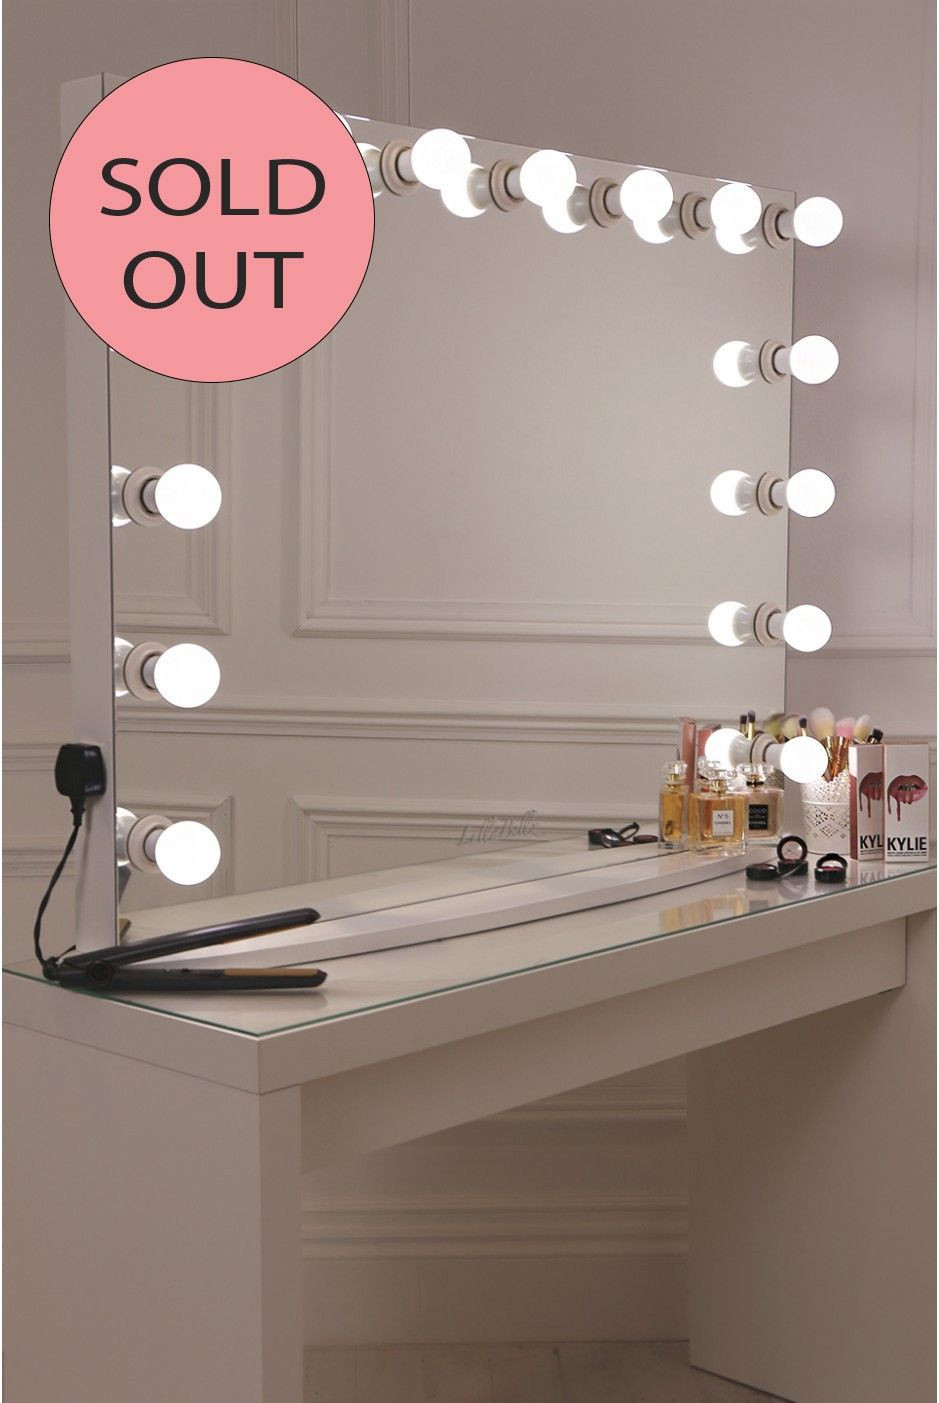 Vanity Girl Hollywood Mirror DIY
 15 frosted bulb Hollywood Mirror with crisp white finish